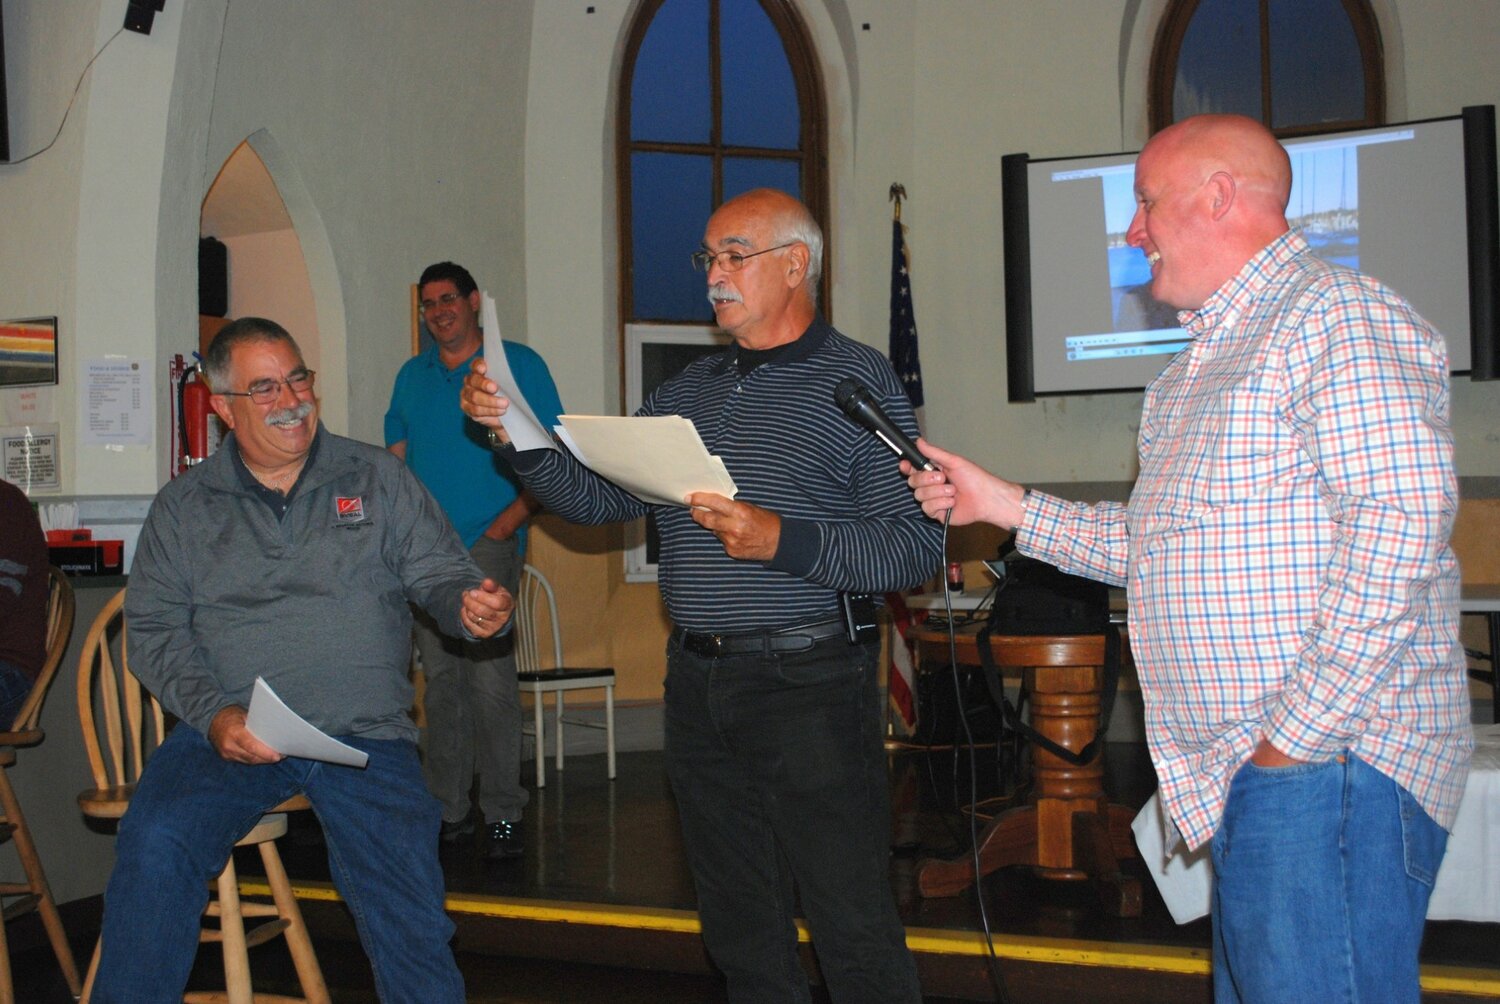 It was a fun-filled night at VFW Hall Saturday night when recently retired Jim Vieira (far left) was "roasted" by fellow Bristol Fire Department colleagues Lou Mascola (center) and Rick Giannini.